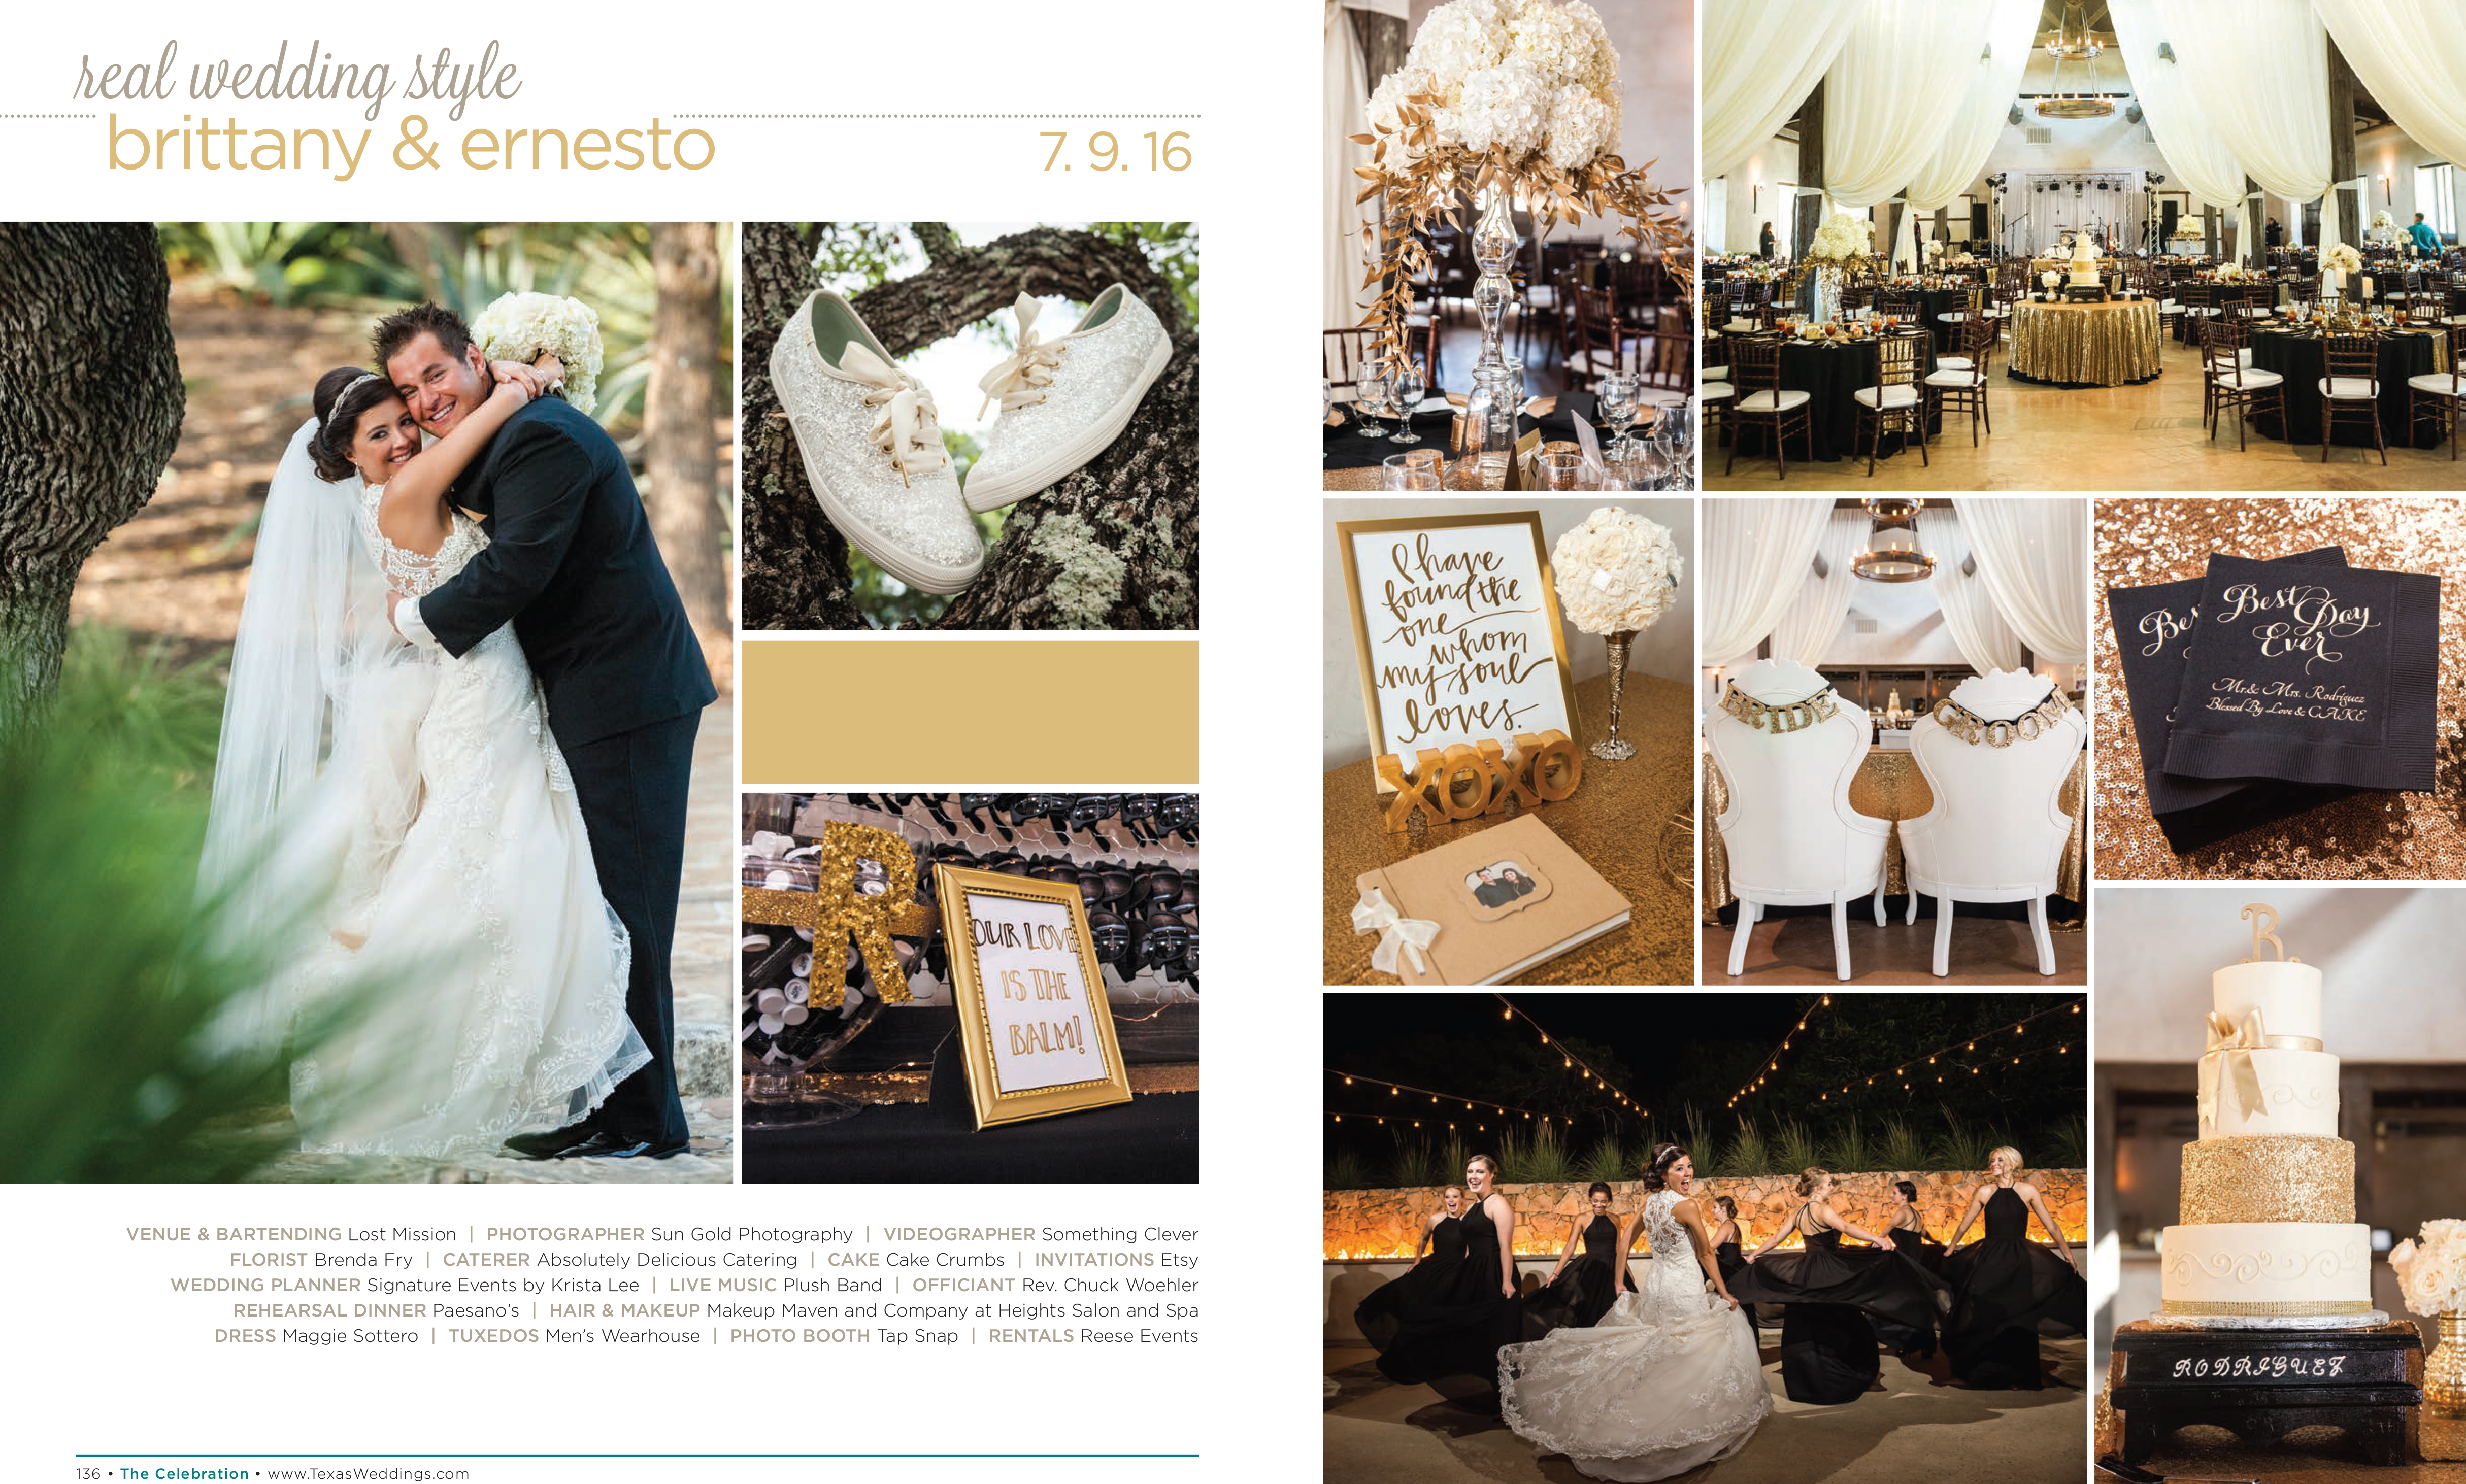 Brittany & Ernesto in their Real Wedding Page in the Spring/Summer 2017 Texas Wedding Guide